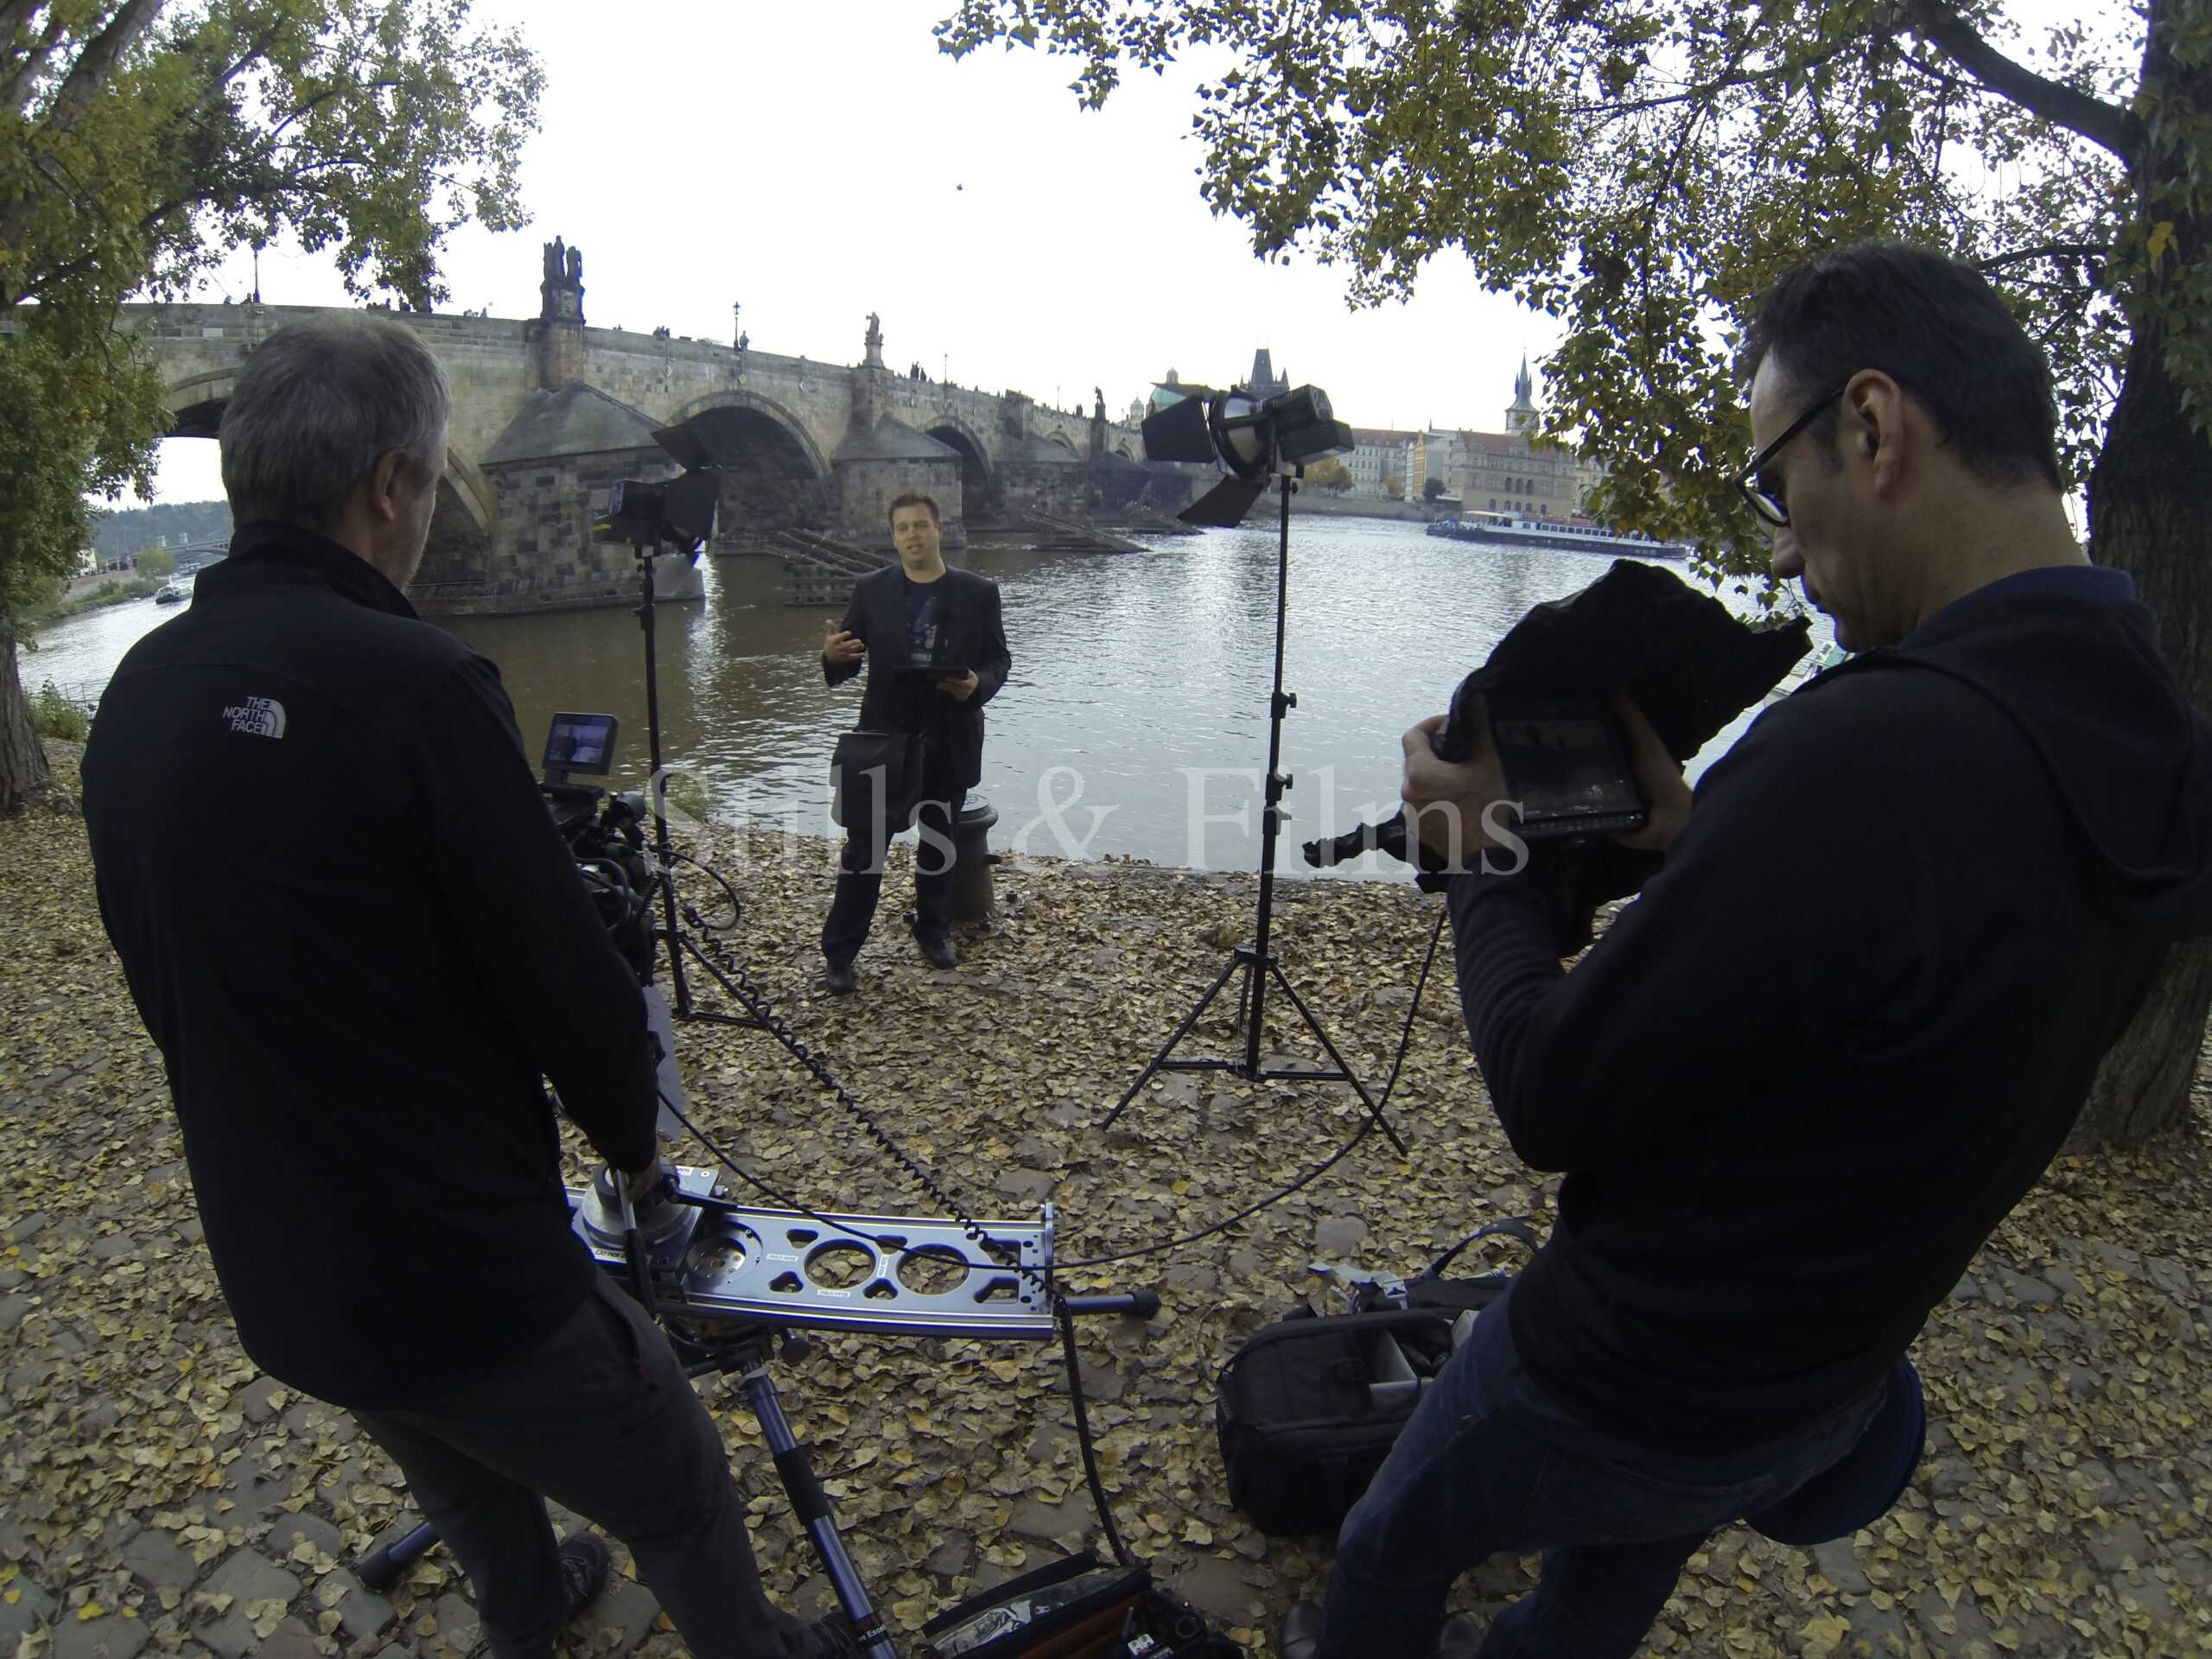 We are filming in Prague at the Vltava riverbank for a US production